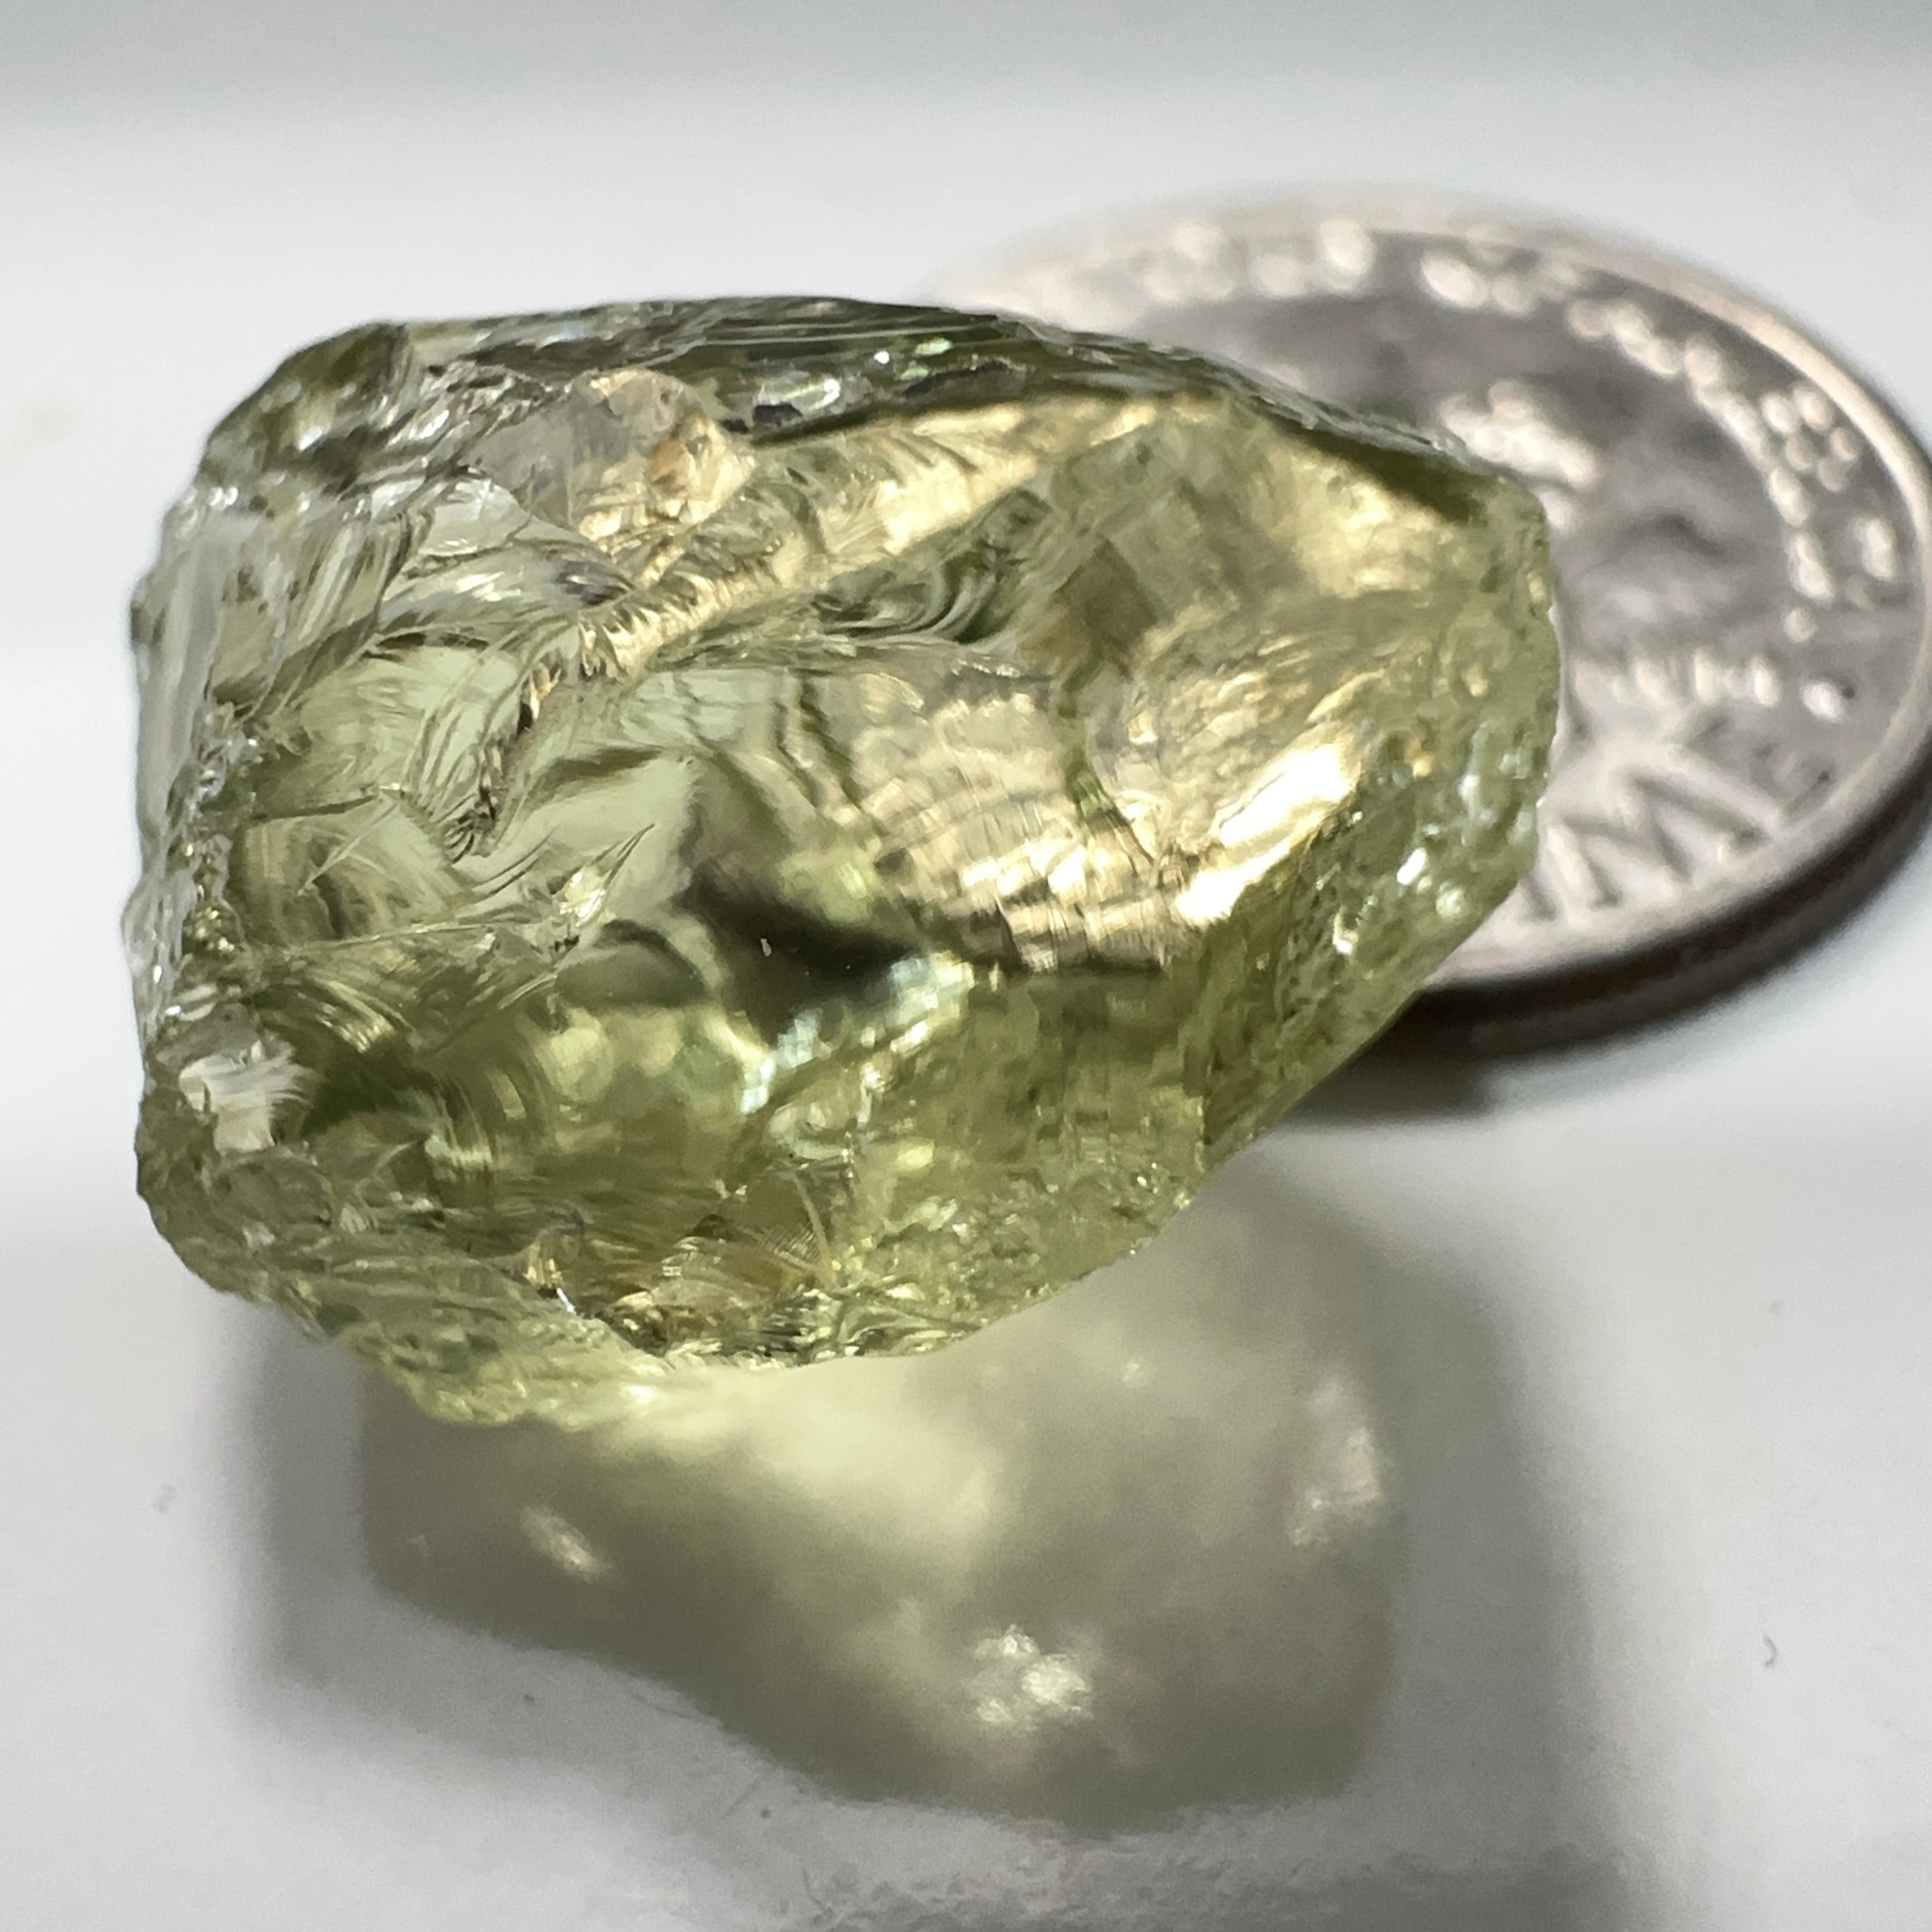 13.15ct Unheated Aquamarine, Tanzania, Unheated Untreated, slight inclusion on the outside will take off a quarter of the stone at the tip, rest vvs-if